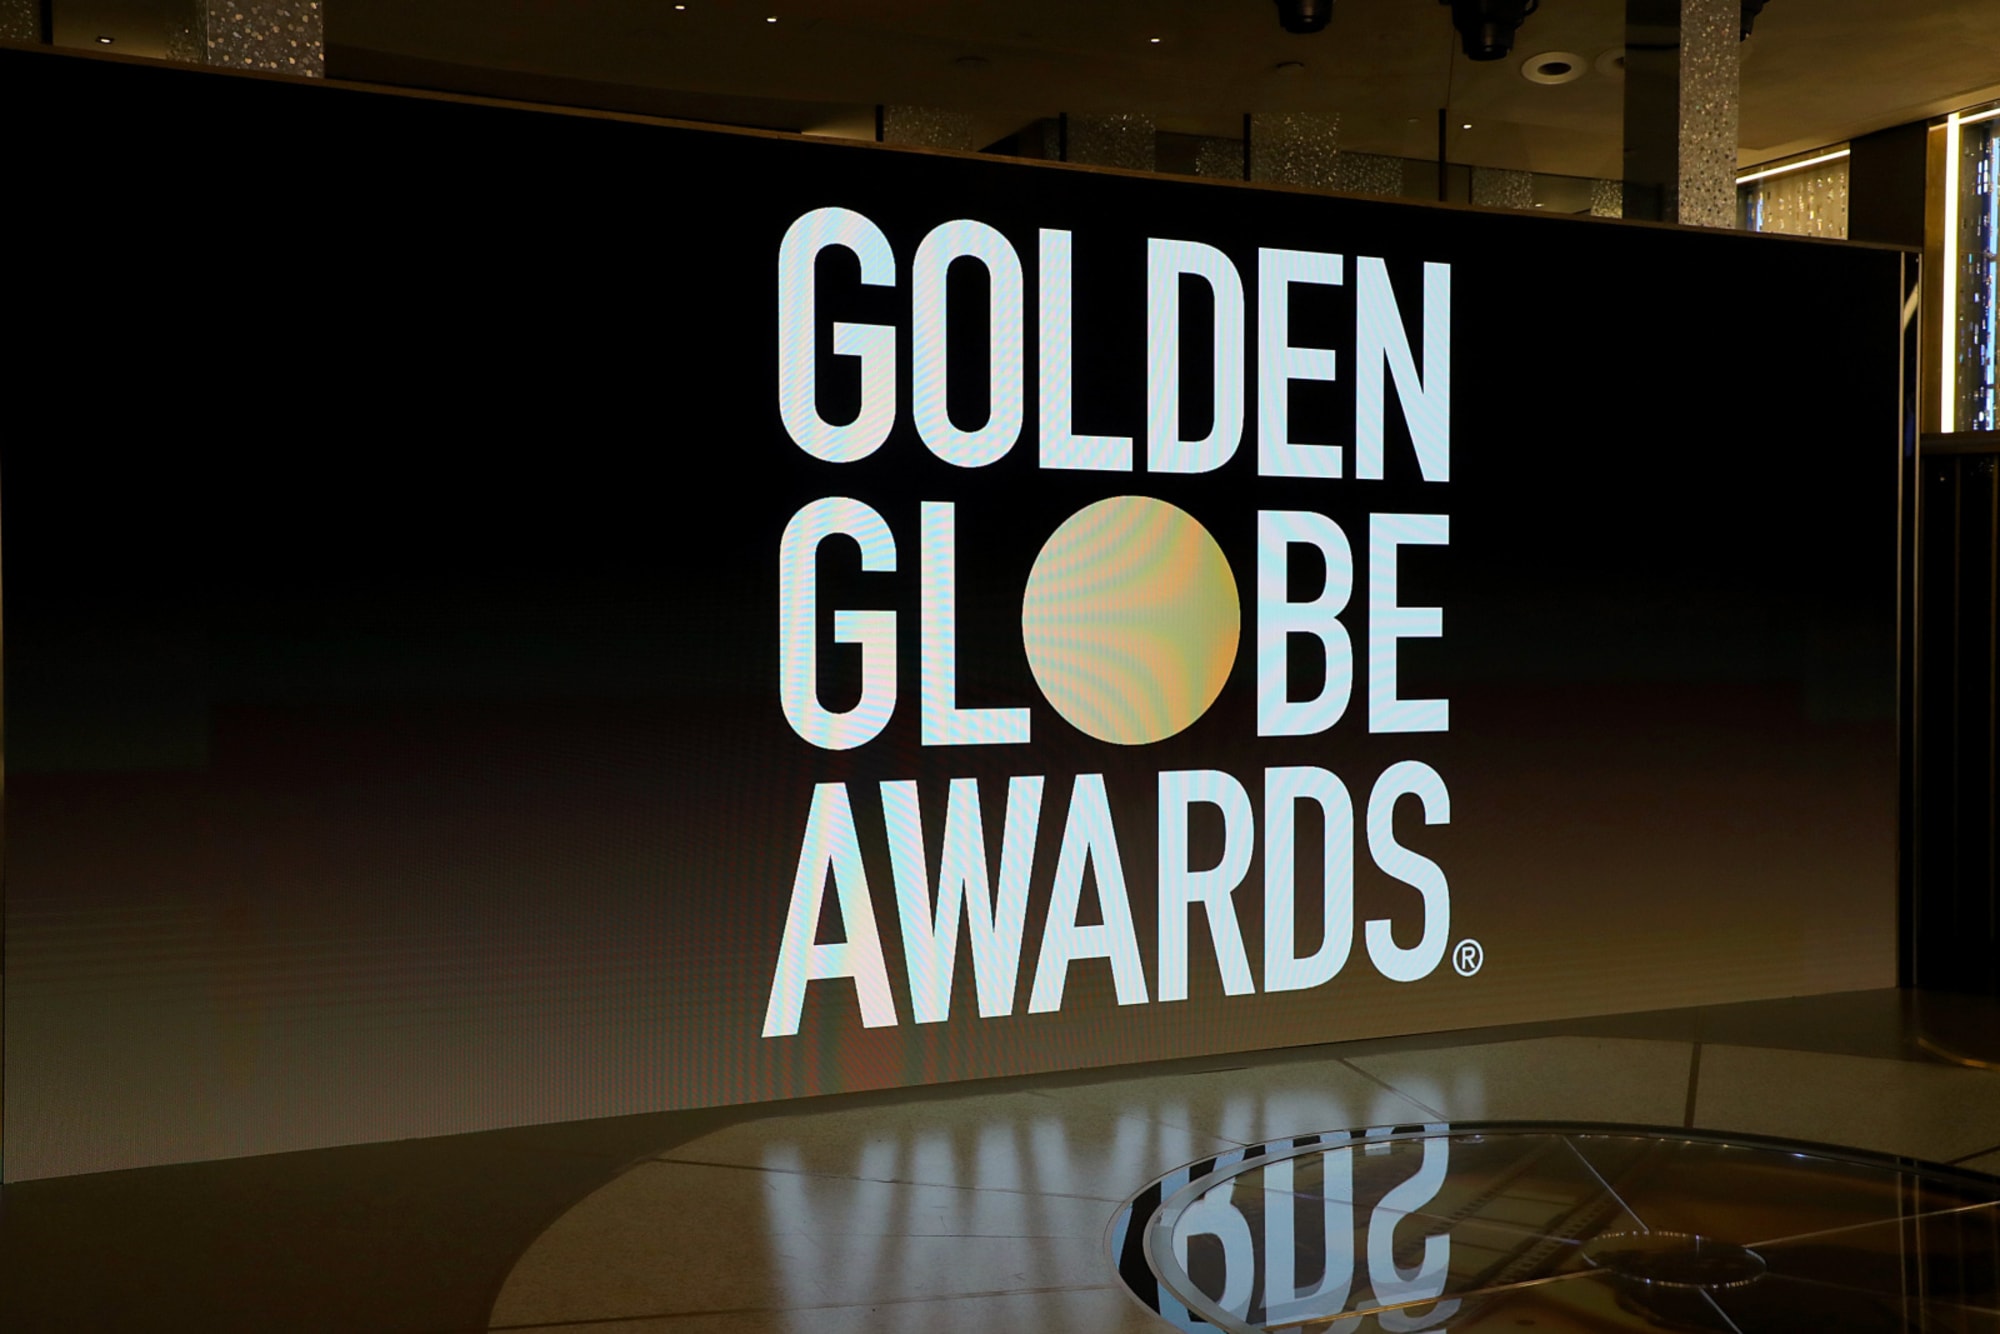 Why didn't the 2021 Golden Globes have an In Memoriam segment?